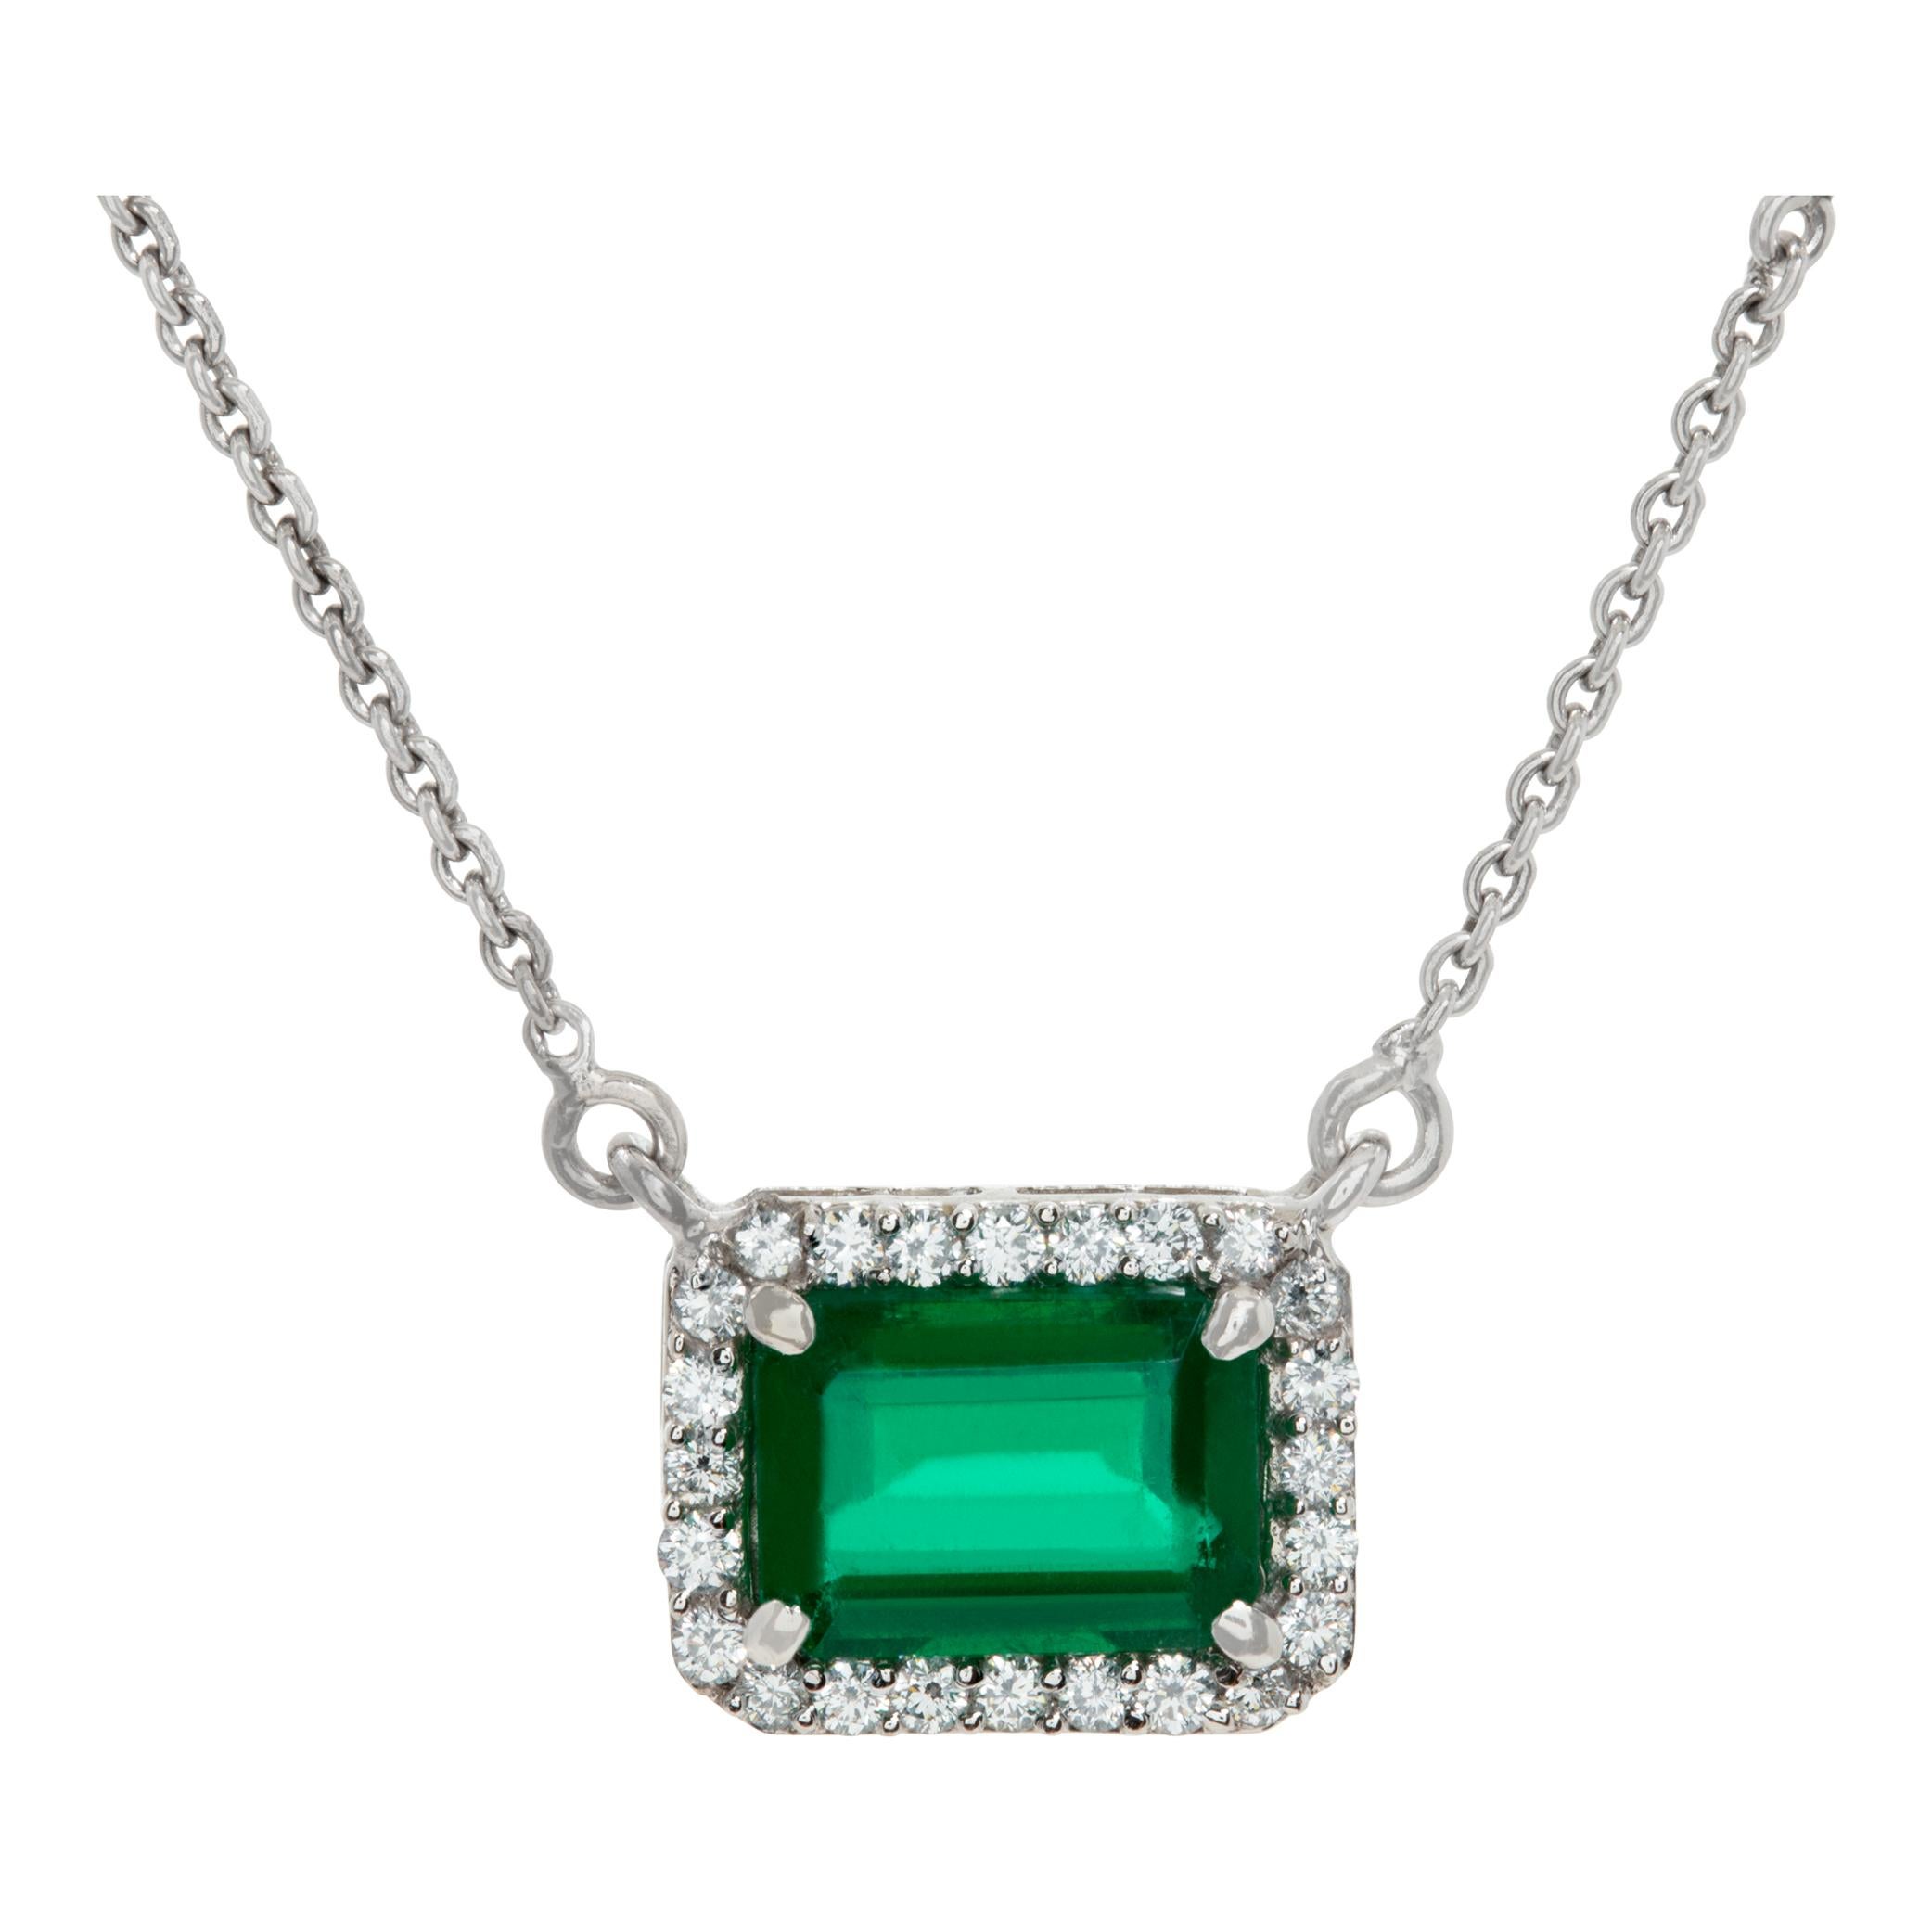 Emerald and diamonds chain necklace pendant set in 18k white gold. Cente emerald cut emerals approx. 4.00 carats. Round brilliant & pear shape cut diamonds  (on the chain) total approx. weight:  0.50 carat, estimate:G-H color, VS clarity. Size of